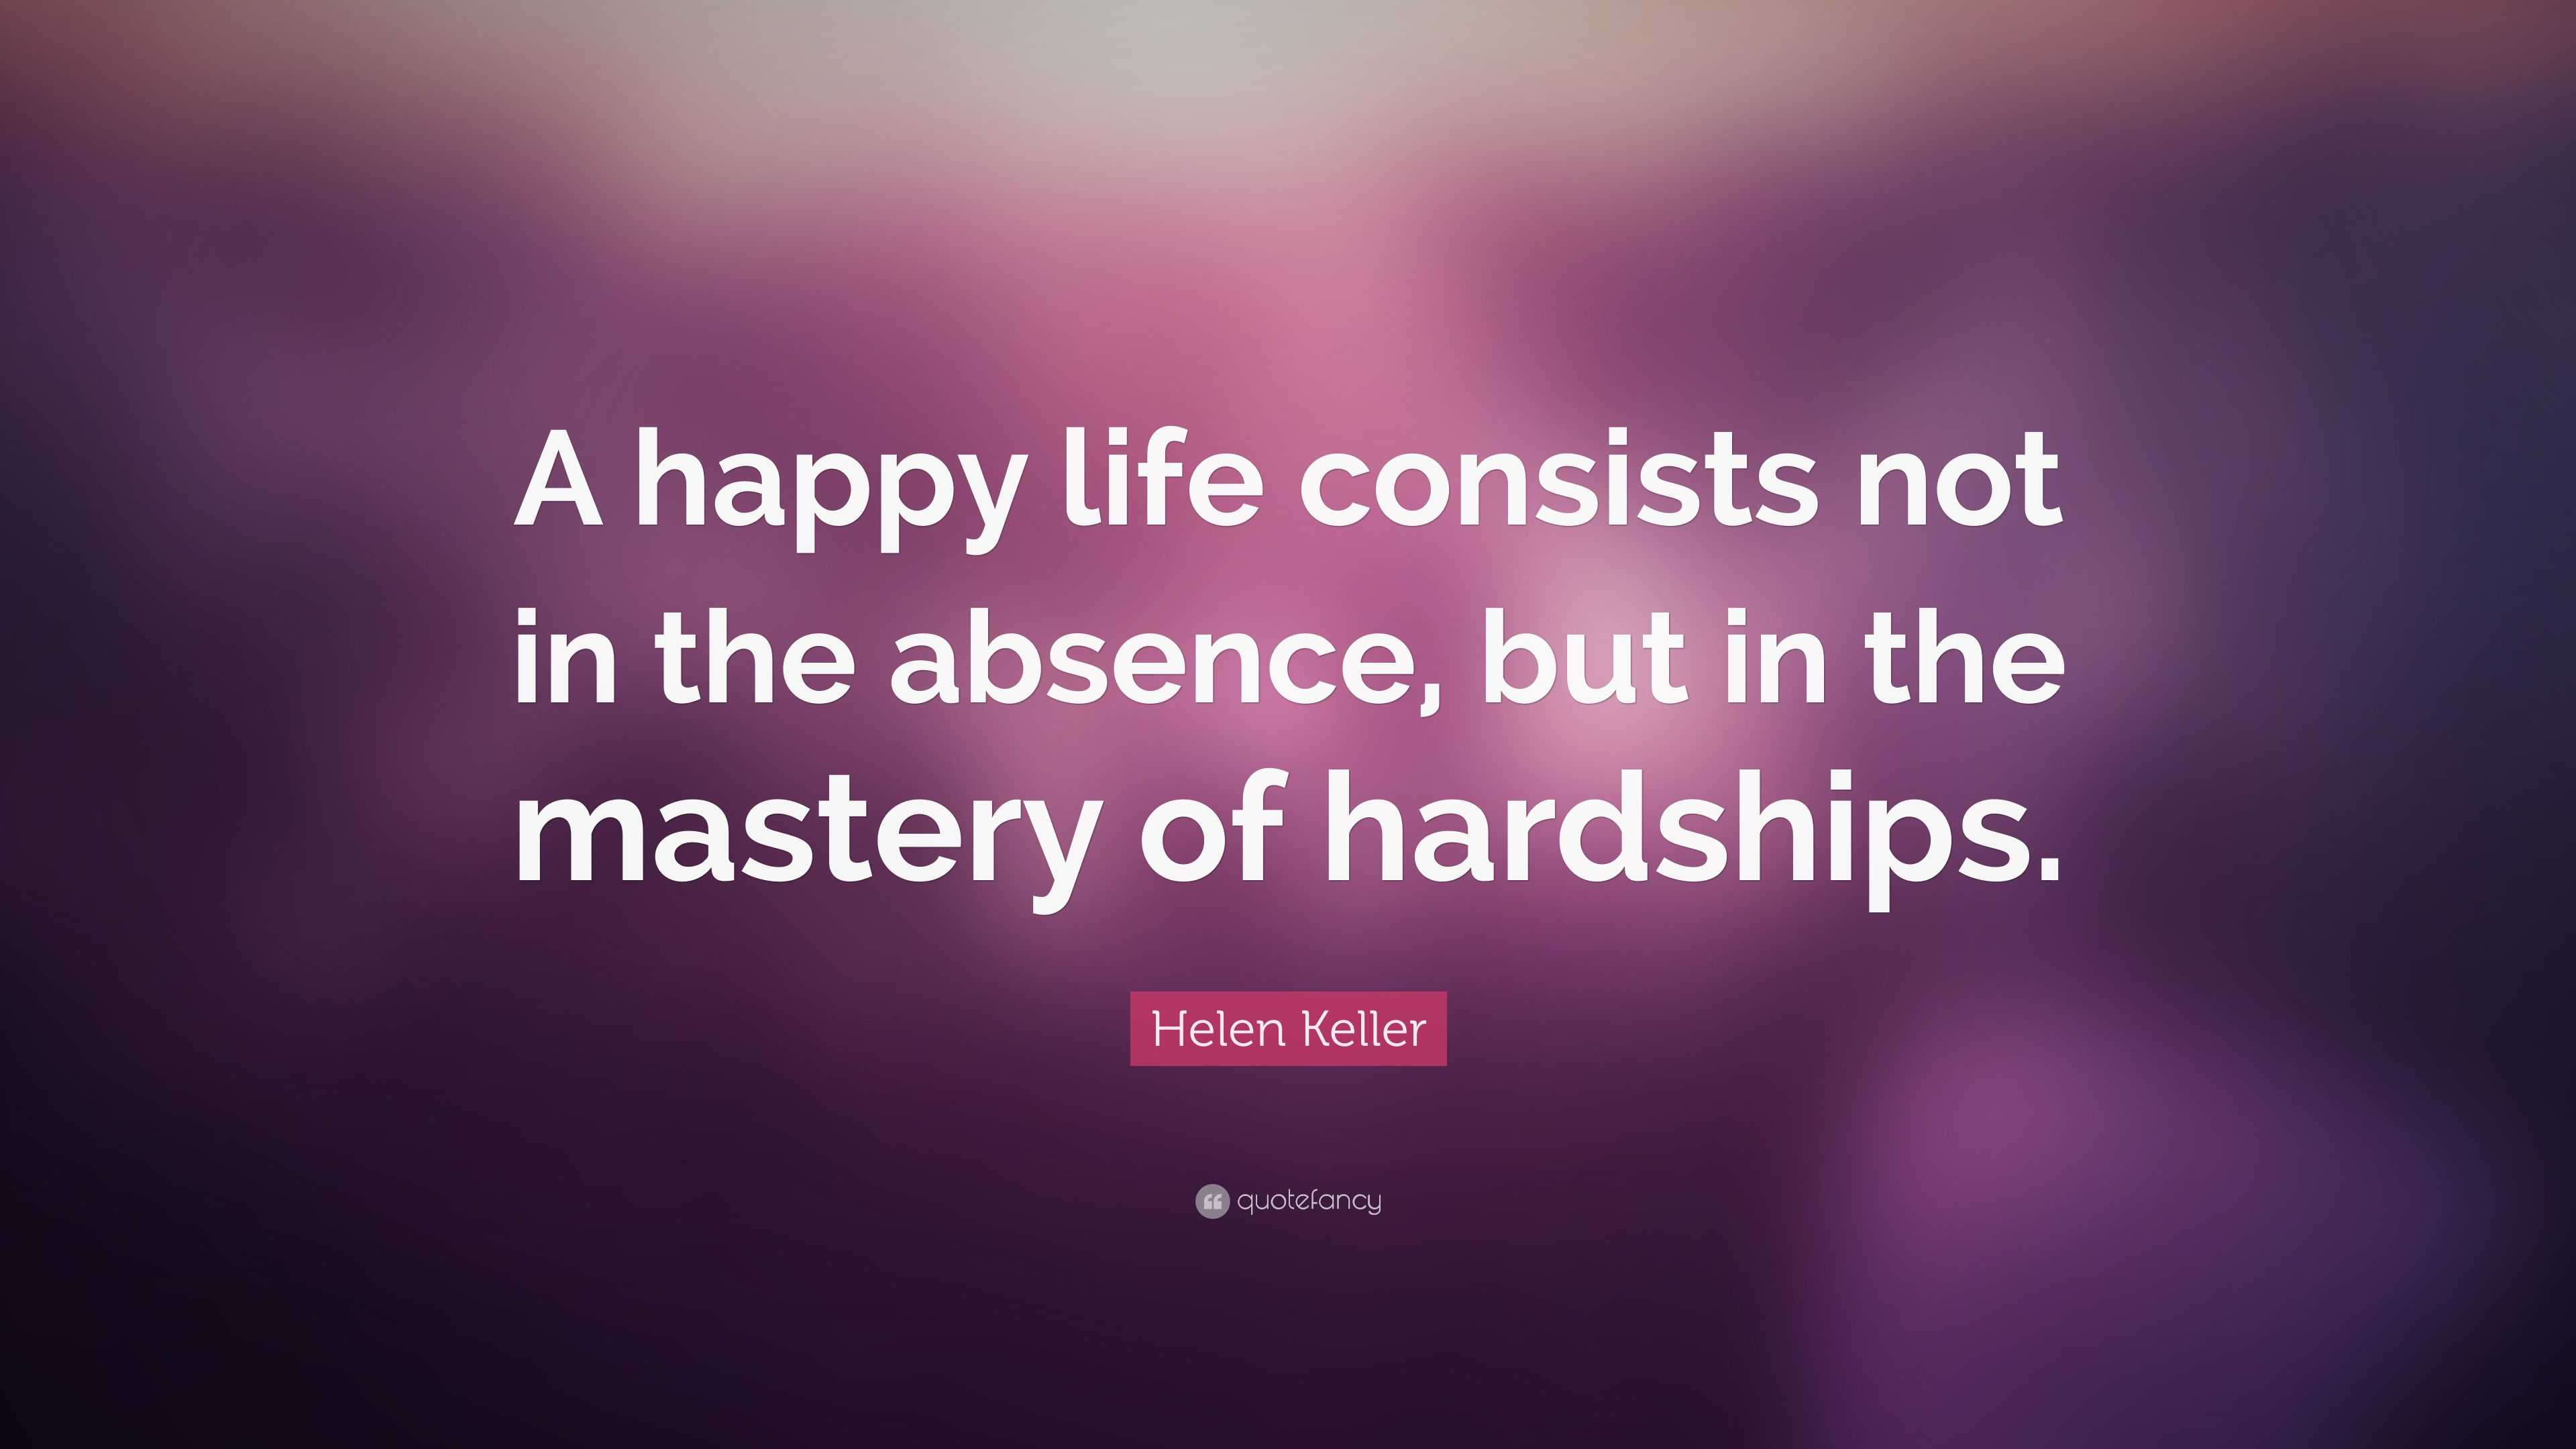 Helen Keller Quote “A happy life consists not in the